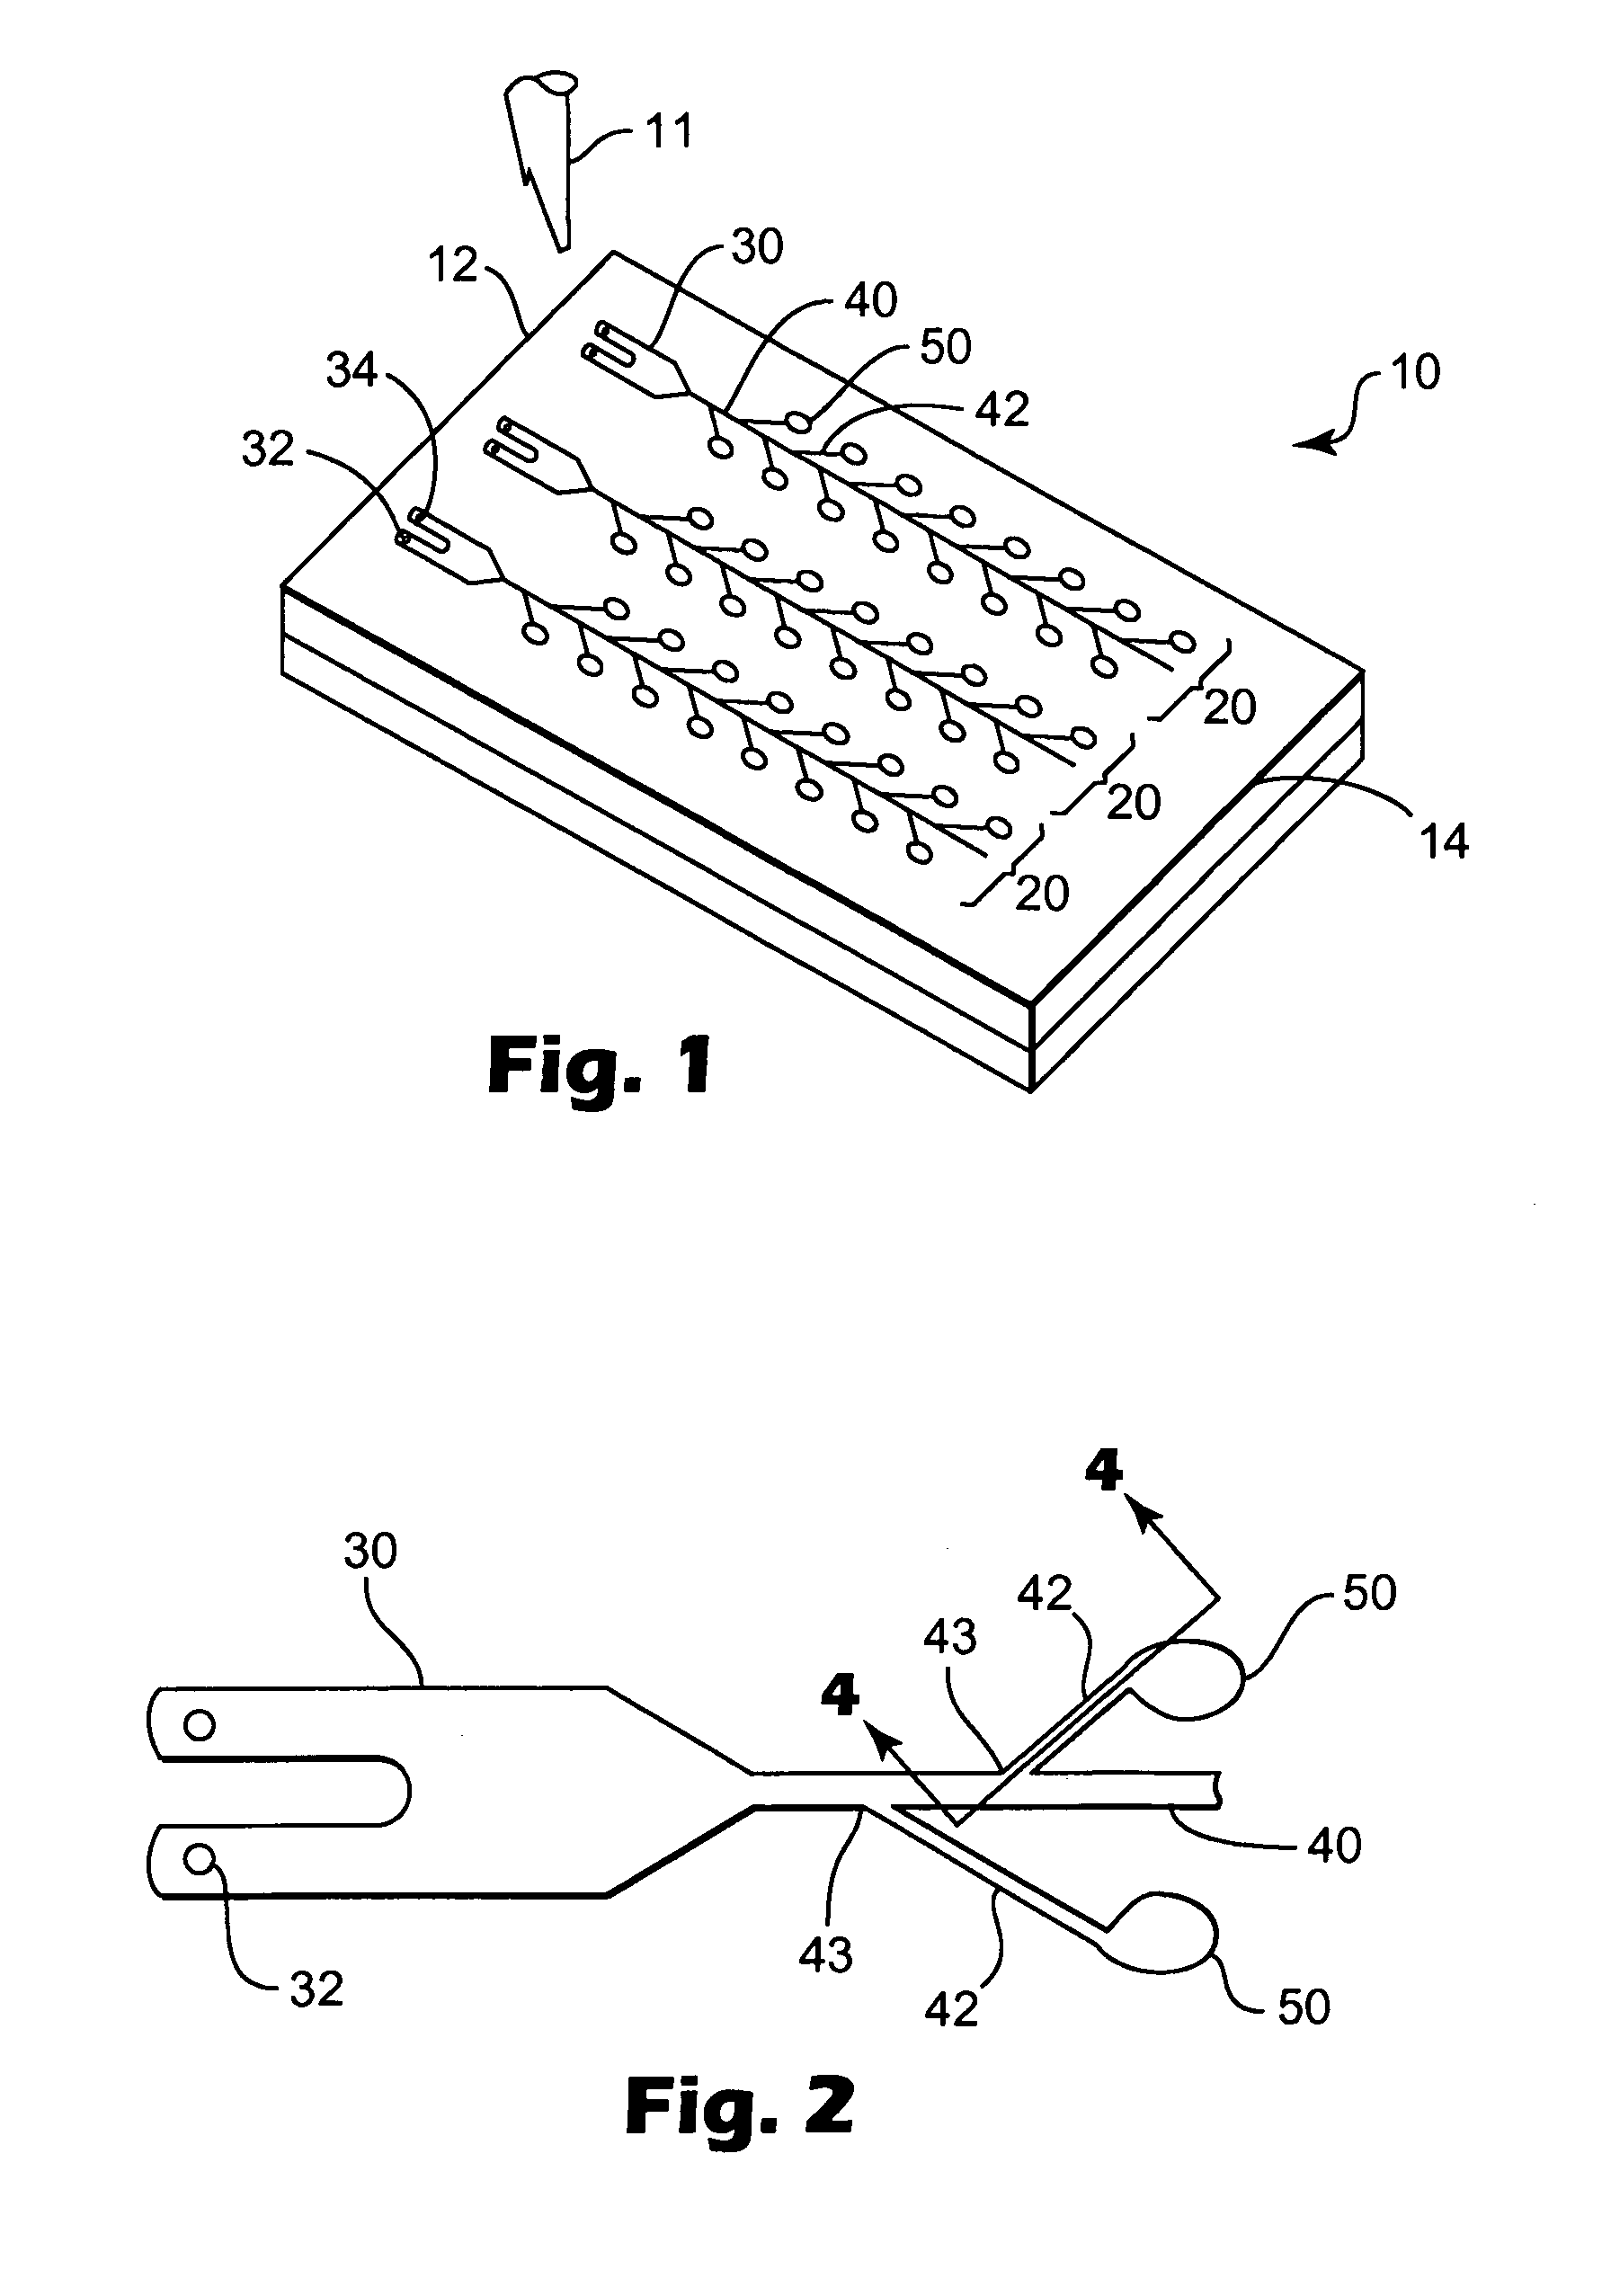 Sample processing devices